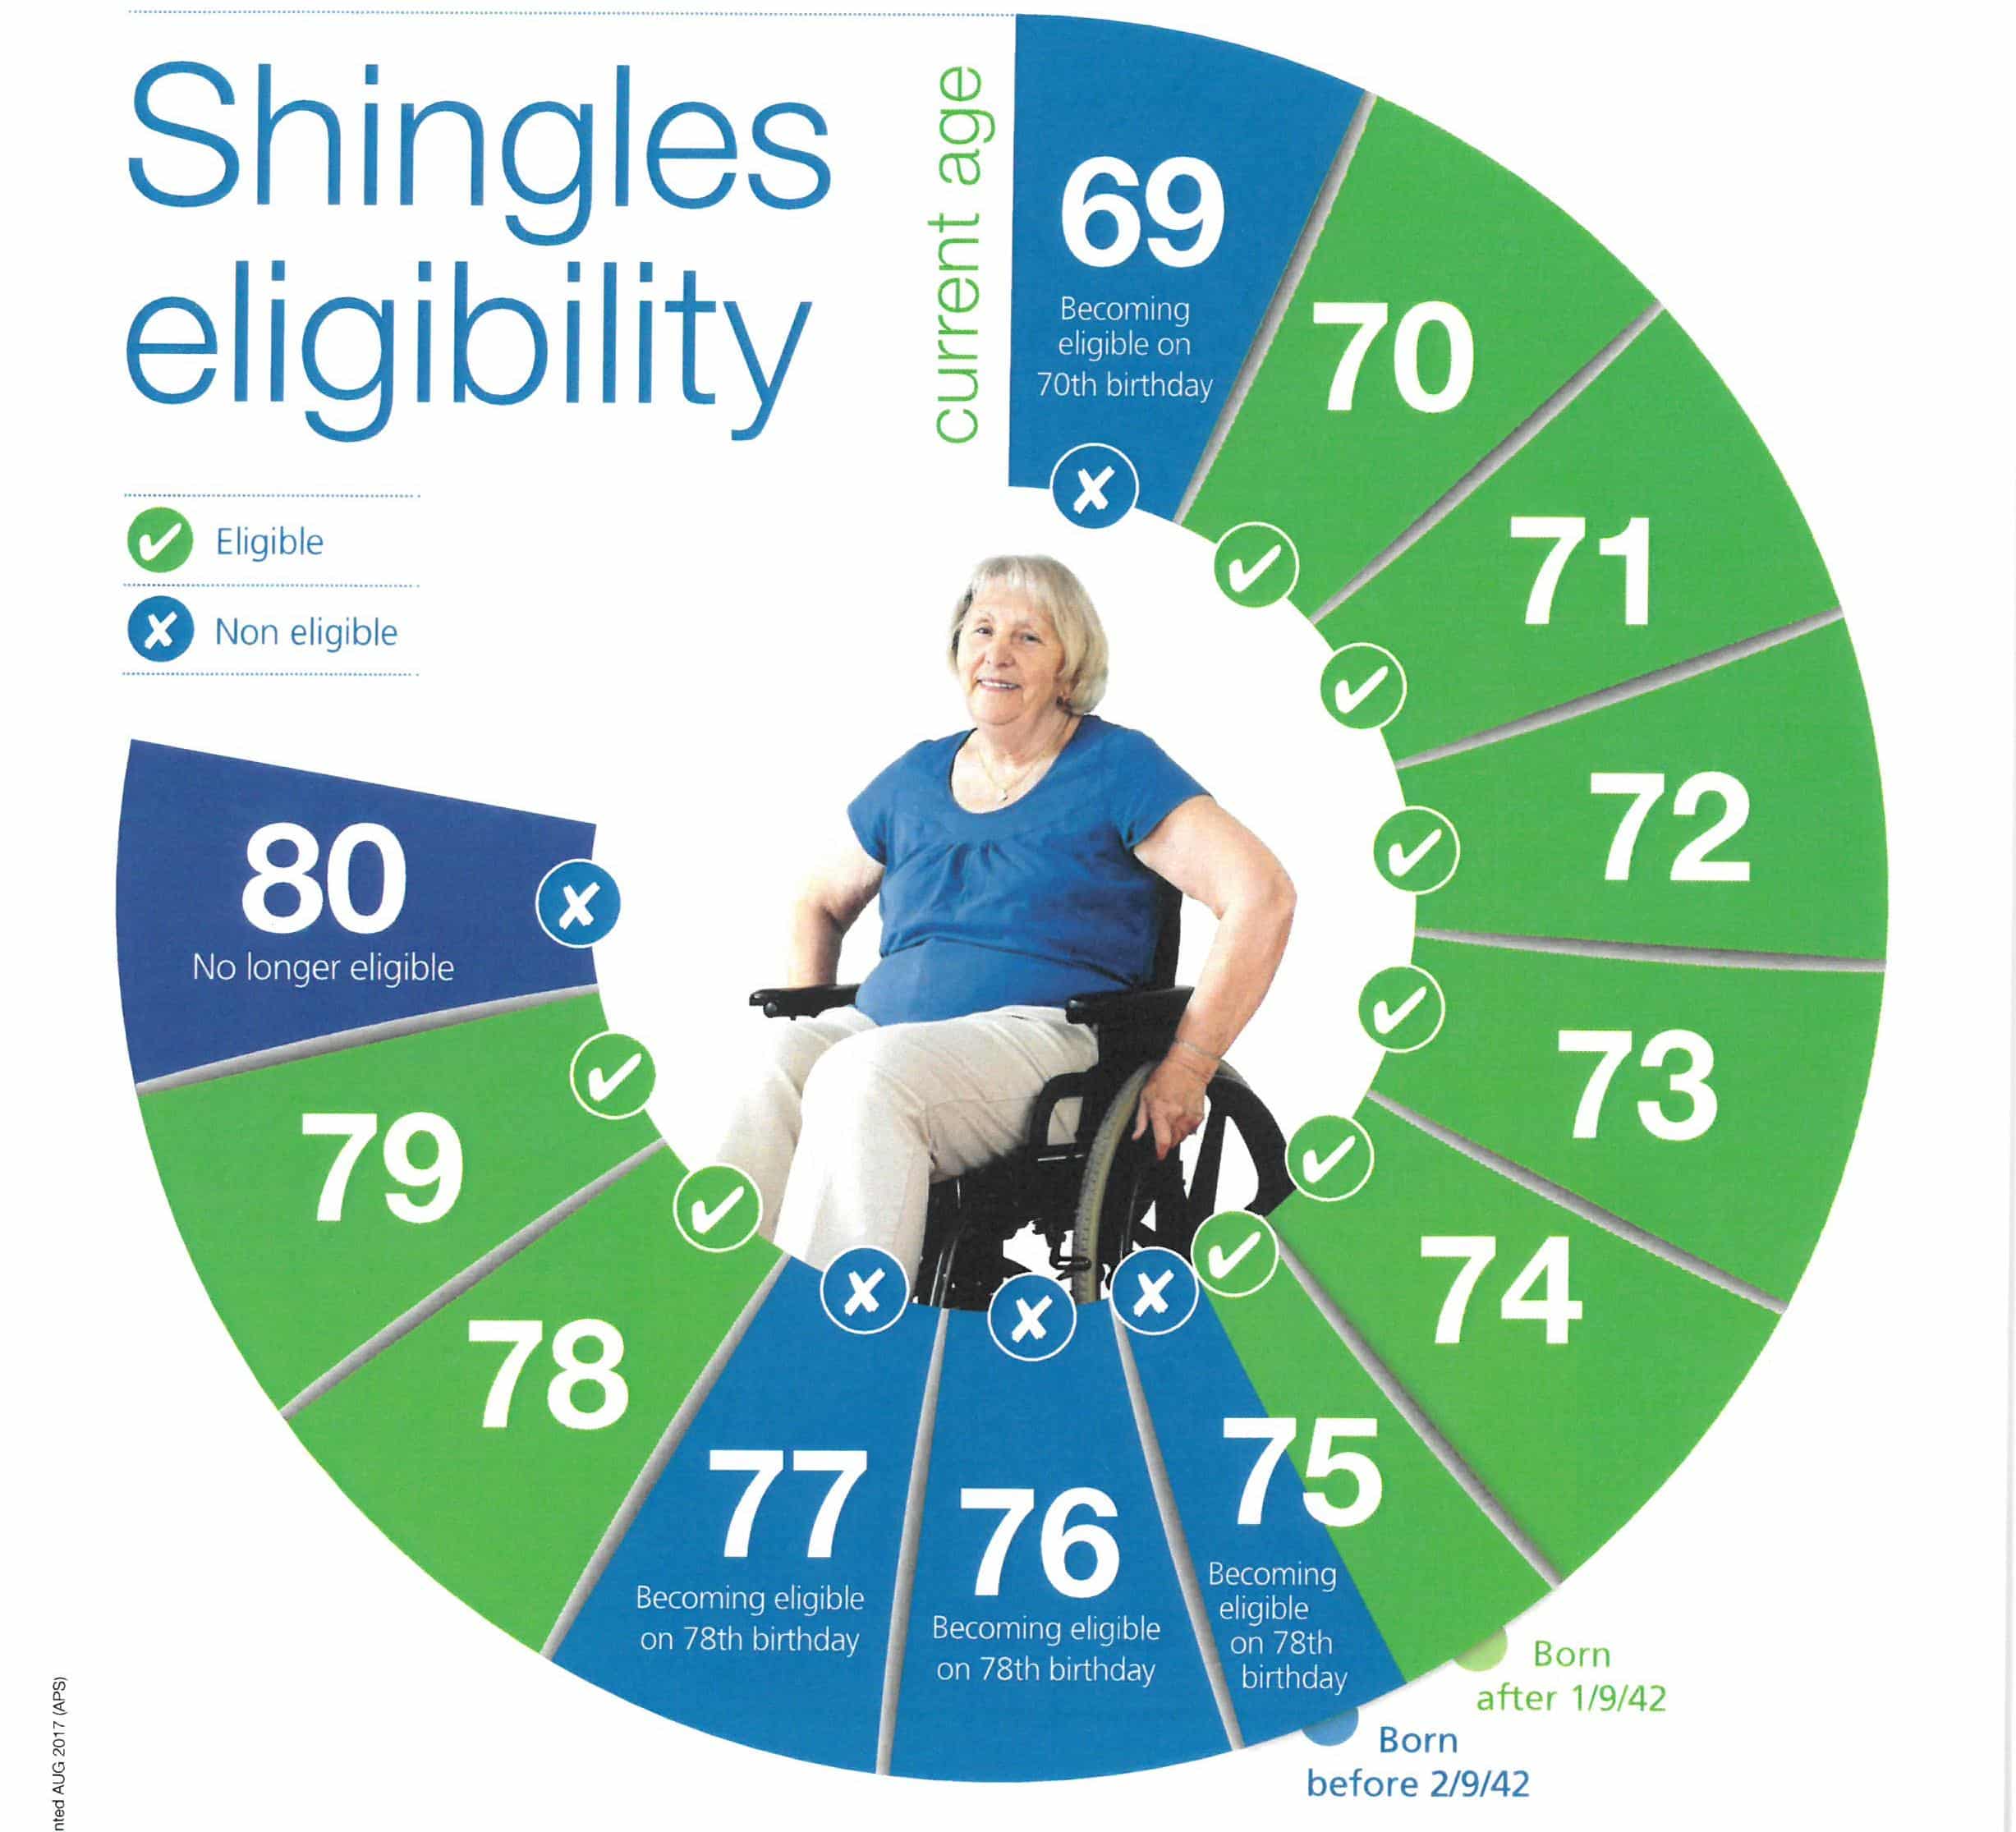 Is Shingles Vaccine Covered By Unitedhealthcare